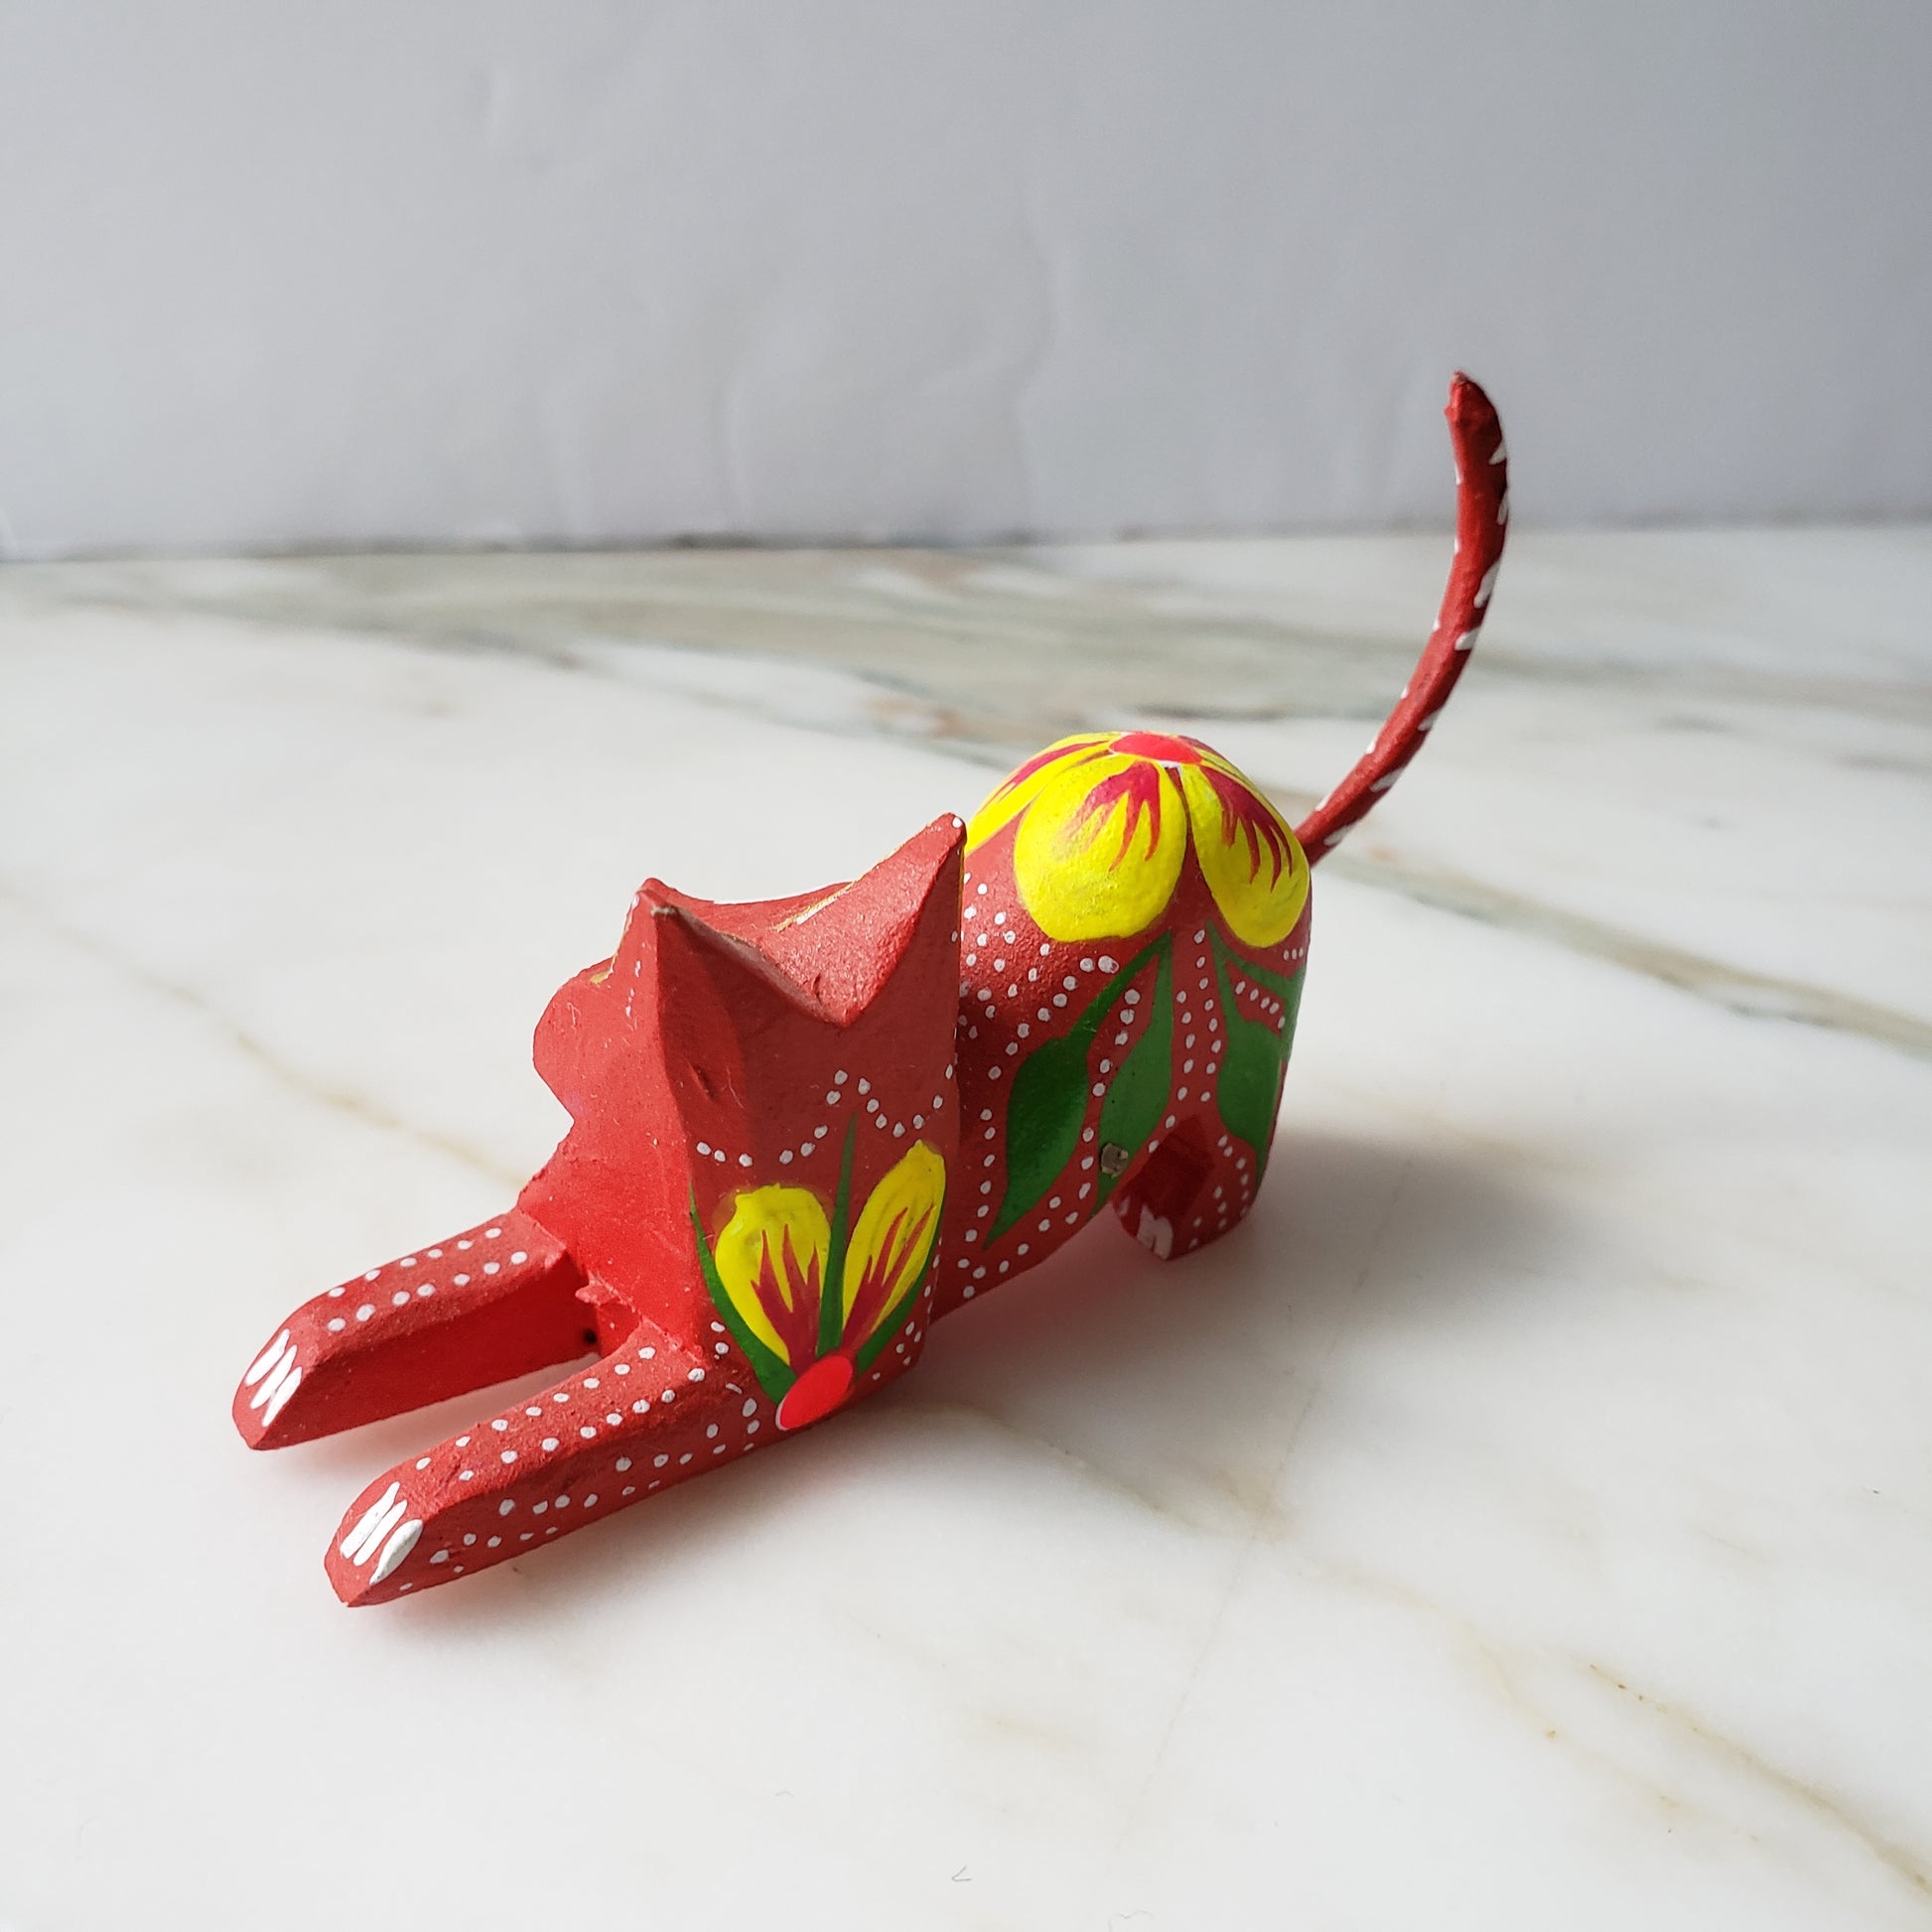 Oaxacan Alebrije Cat Mini Wood Carving Mexican Hand Painted - The Little Pueblo